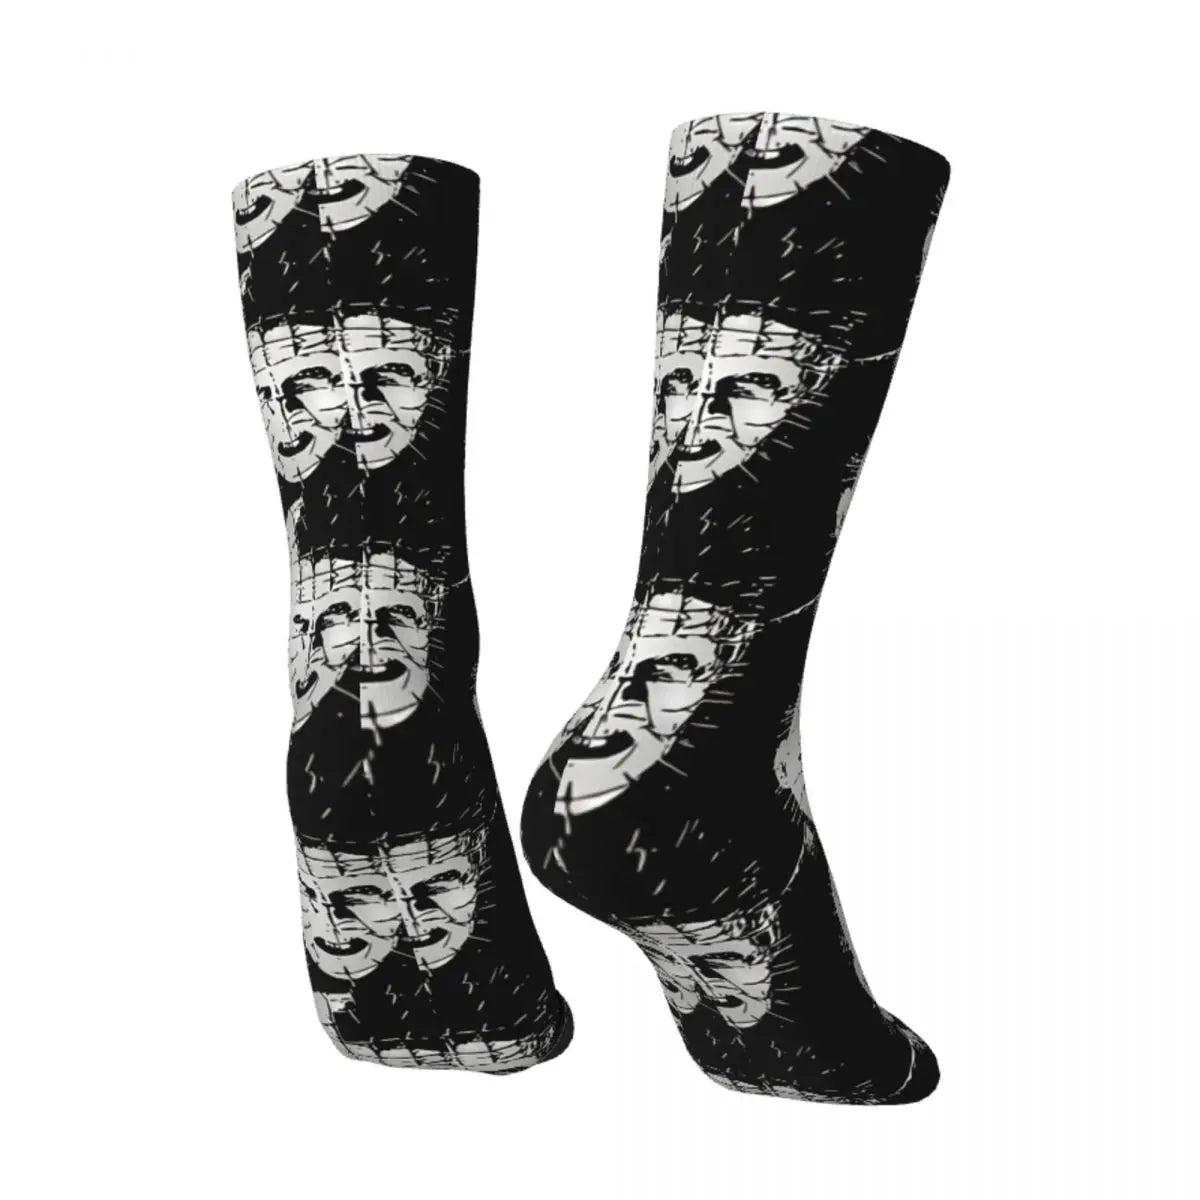 Hellraiser 1987 Horror Movie Socks - Hip Hop Vintage Crazy Men's - Unisex Harajuku Seamless Printed Happy Crew Gift-As The Picture-One Size-